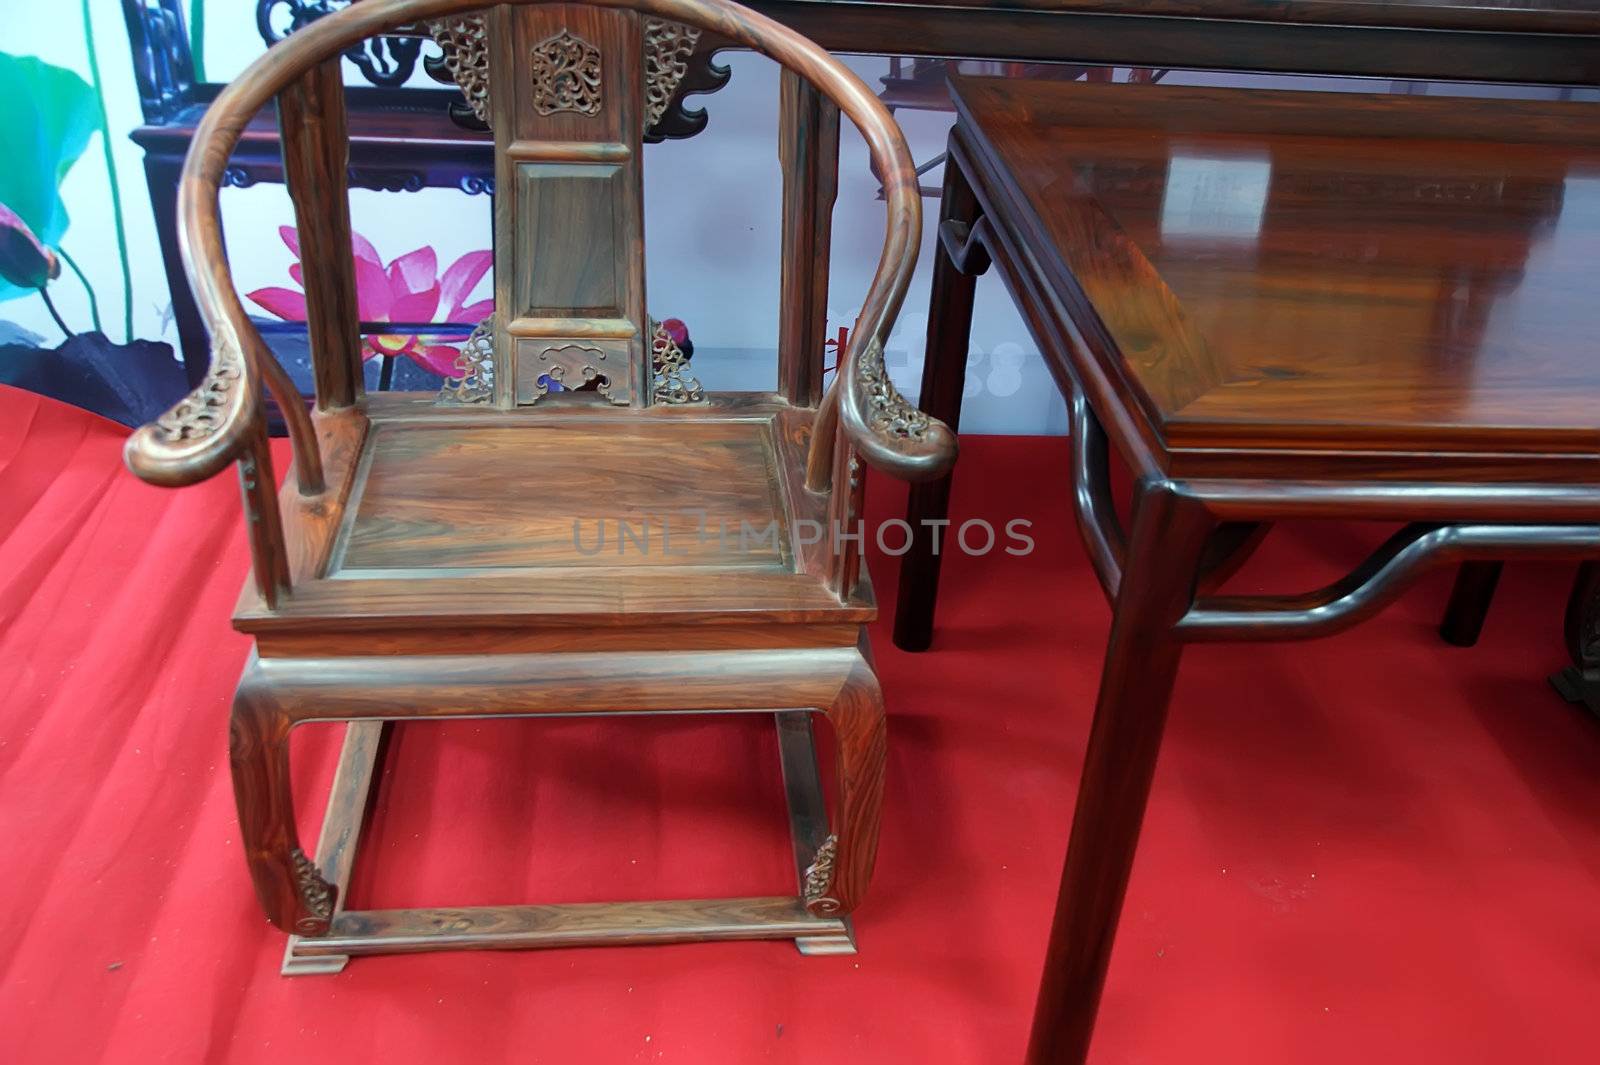 Mahogany furniture - tables, chairs by xfdly5